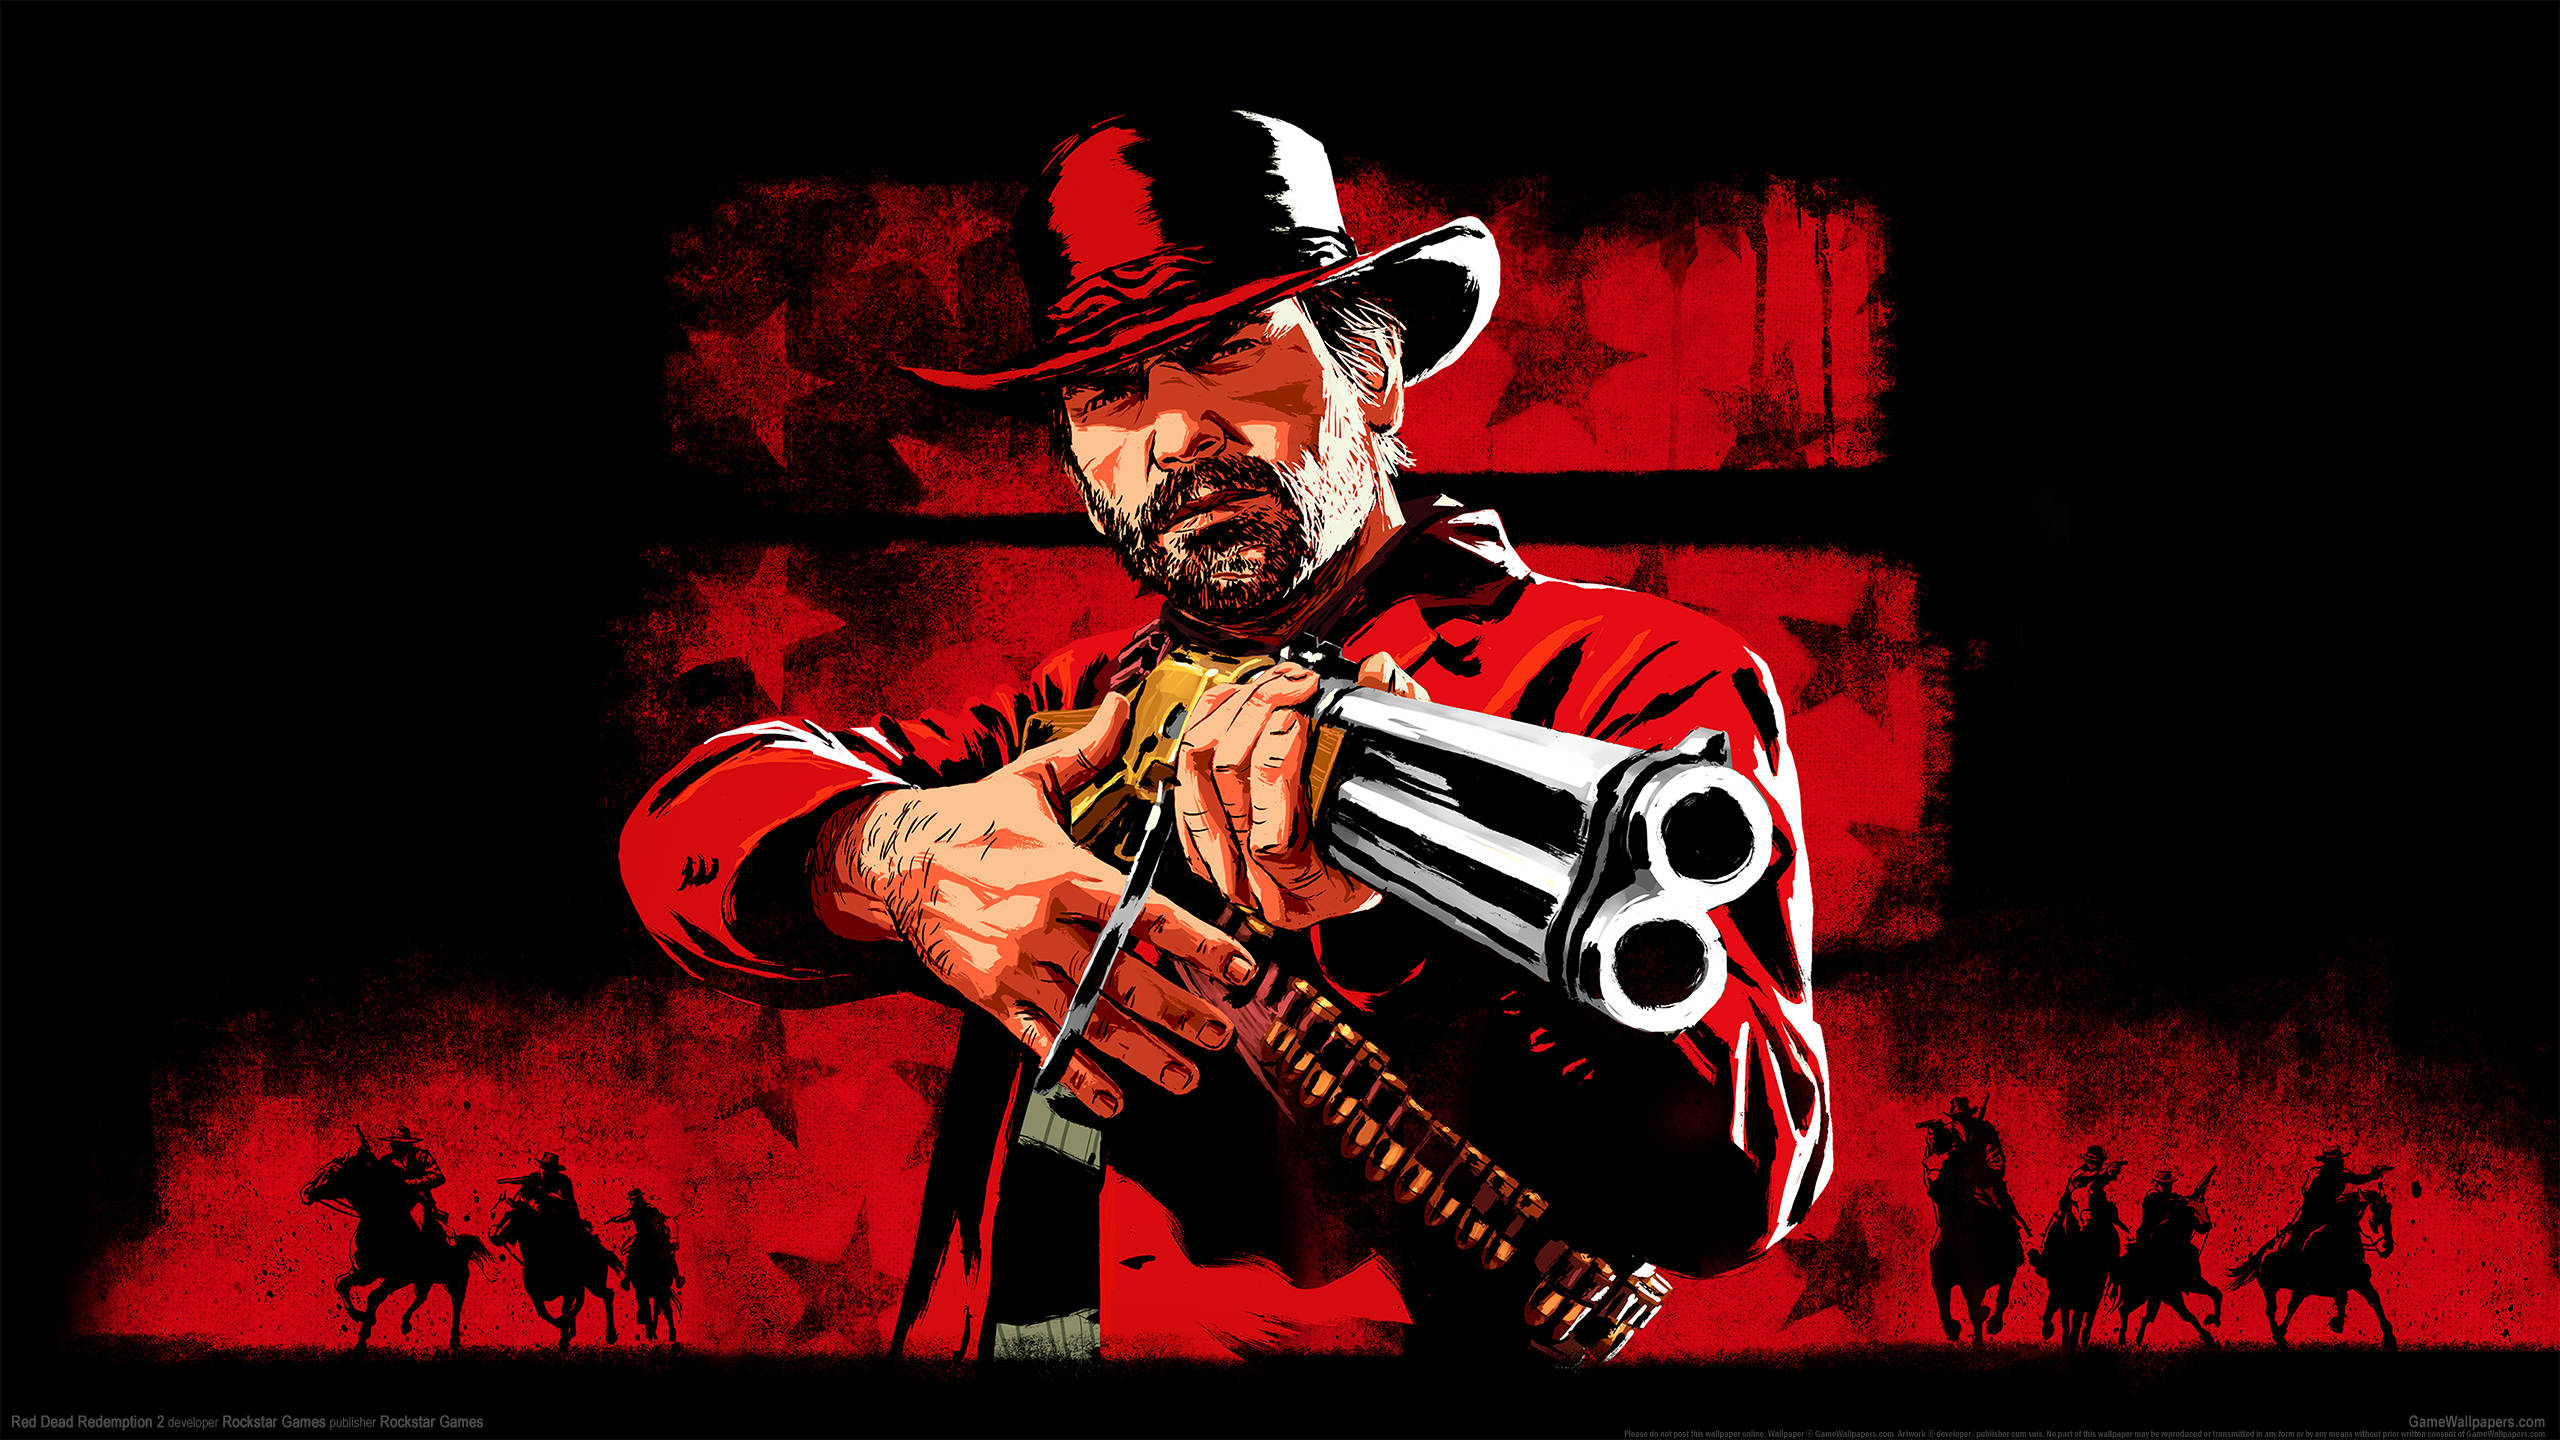 Read red 2. Ред дед редемпшен 2. Red Dead Redemption 4. Игра ред деад редемптион 2. Red Dead Redemption 2 2560 x 1440.